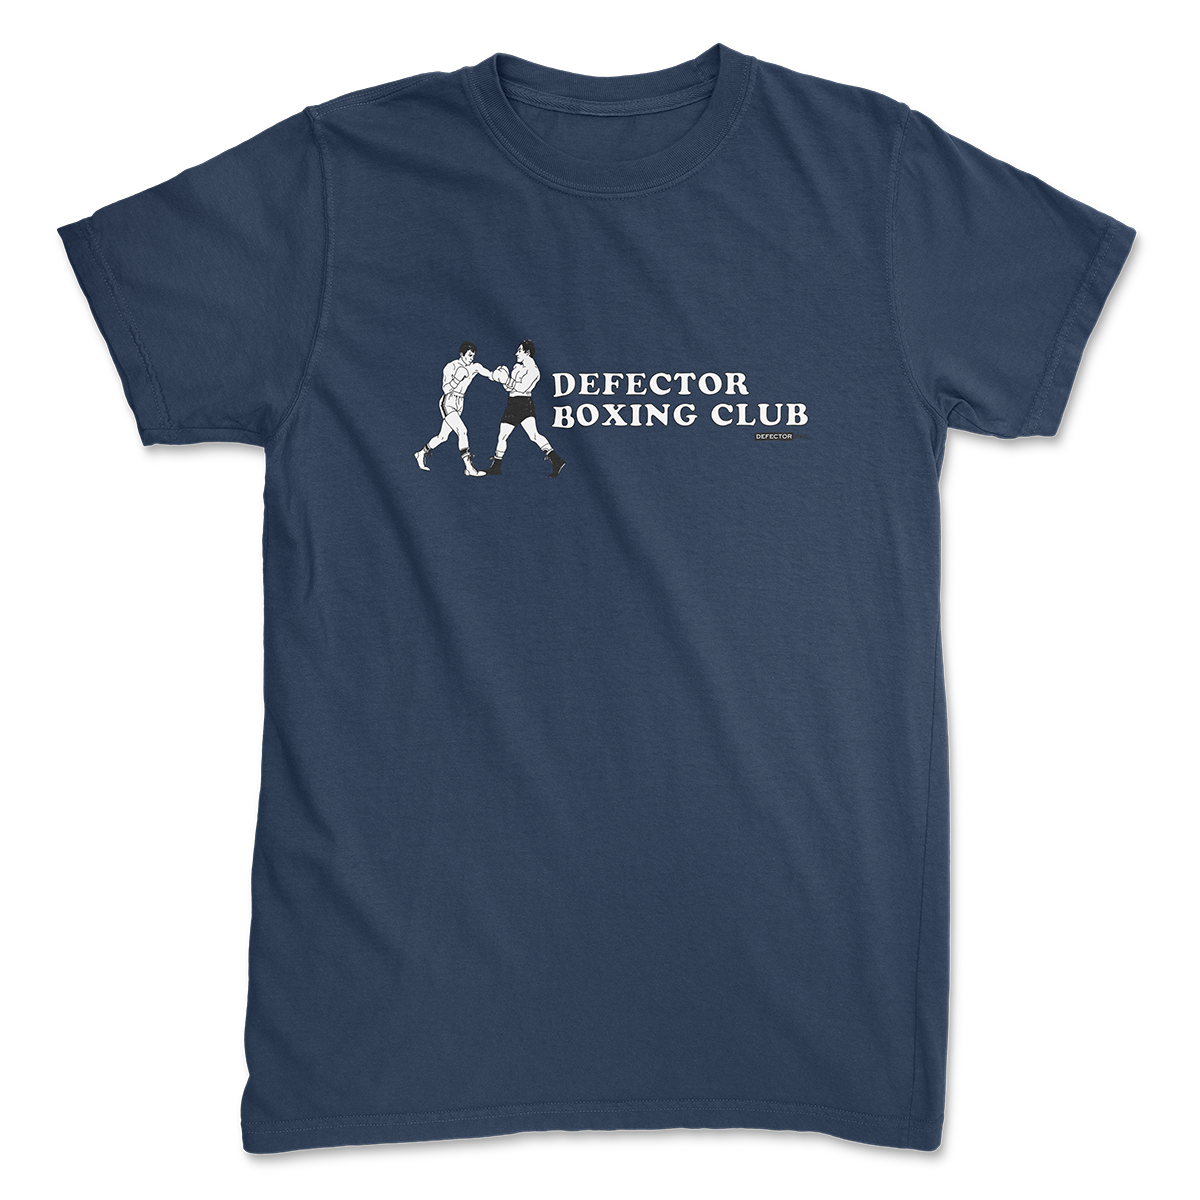 Defector shirt that says “DEFECTOR BOXING CLUB.” Features clip art of boxers.  Blue shirt in ‘unisex’ cut.